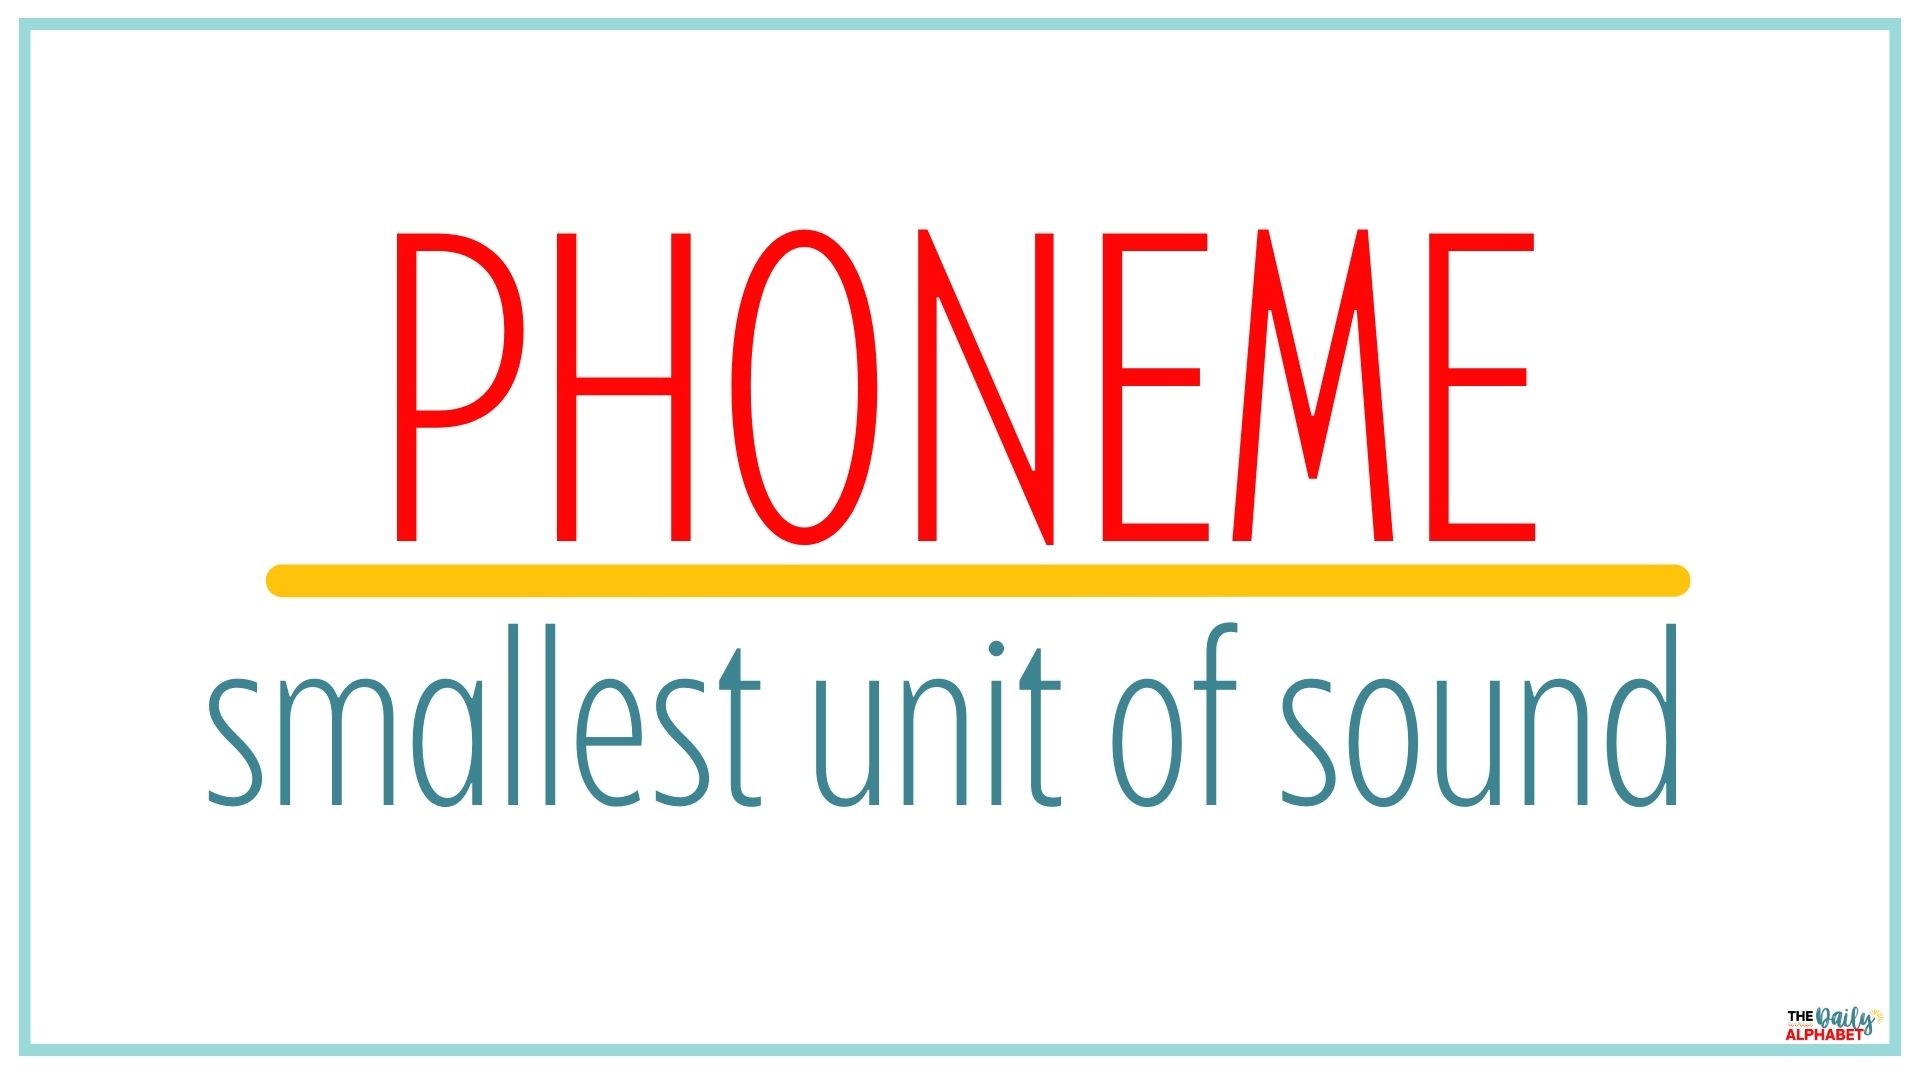 A phoneme is the smallest unit of sound